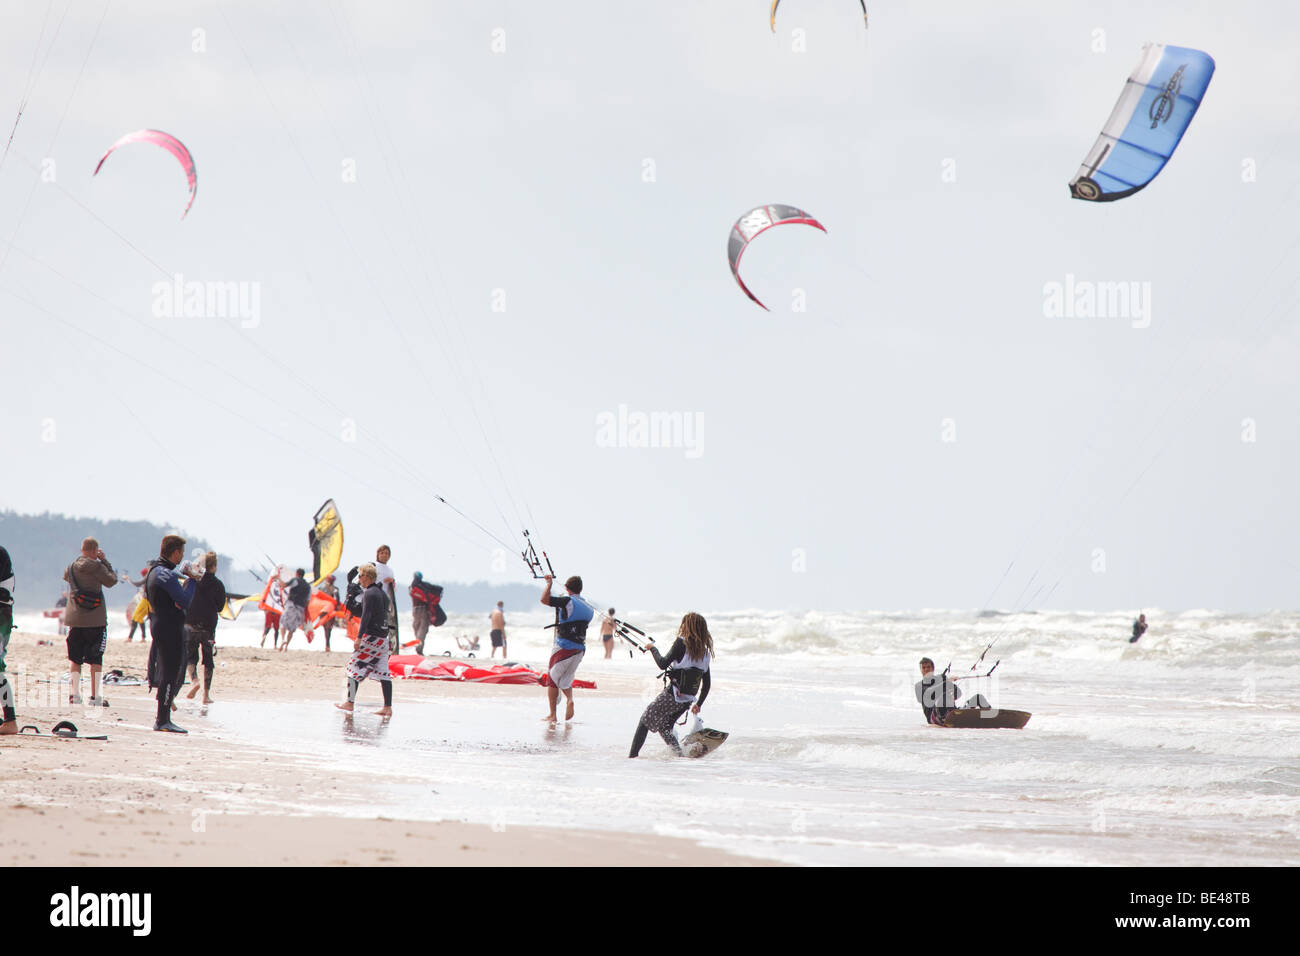 Kiteboarding competition with many active people and kites flying high in the sky Stock Photo